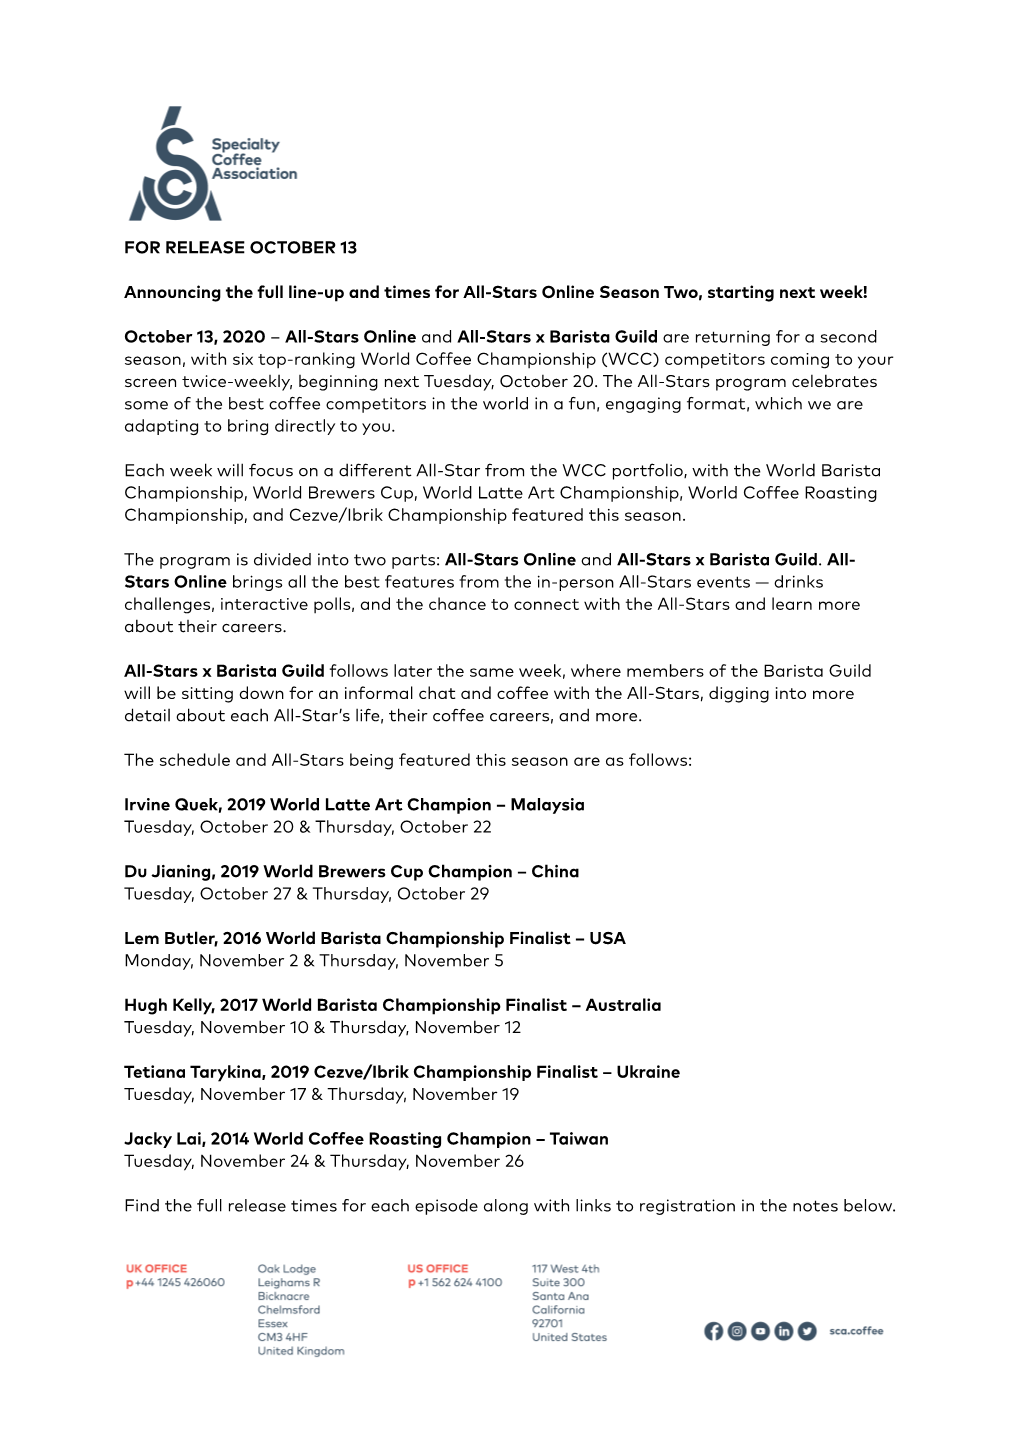 All-Stars Online S2 Press Release October 13 2020-Pages